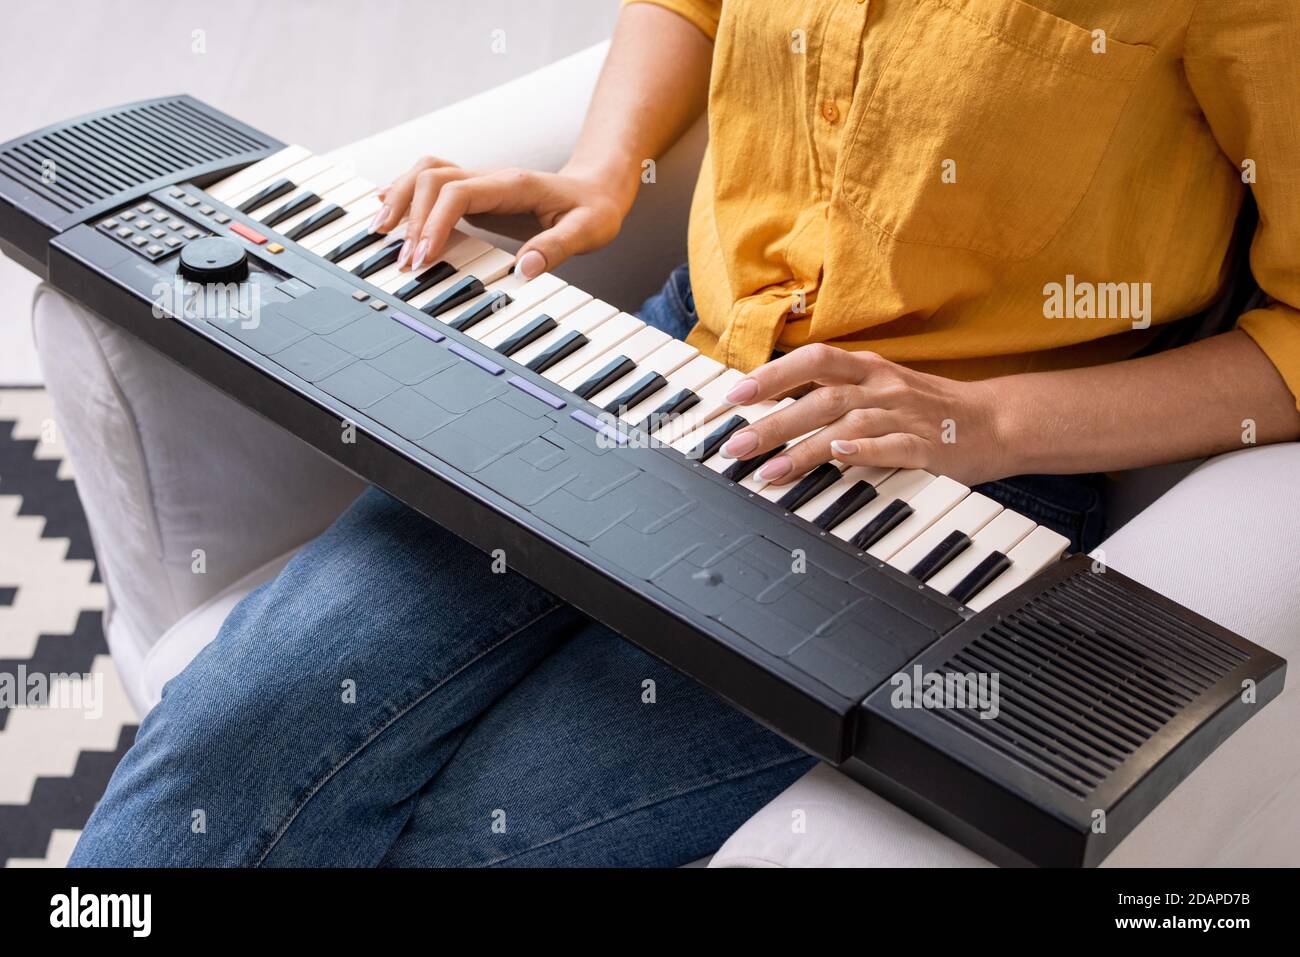 Hands of young woman in casualwear pressing keys of musical synthesizer keyboard Stock Photo